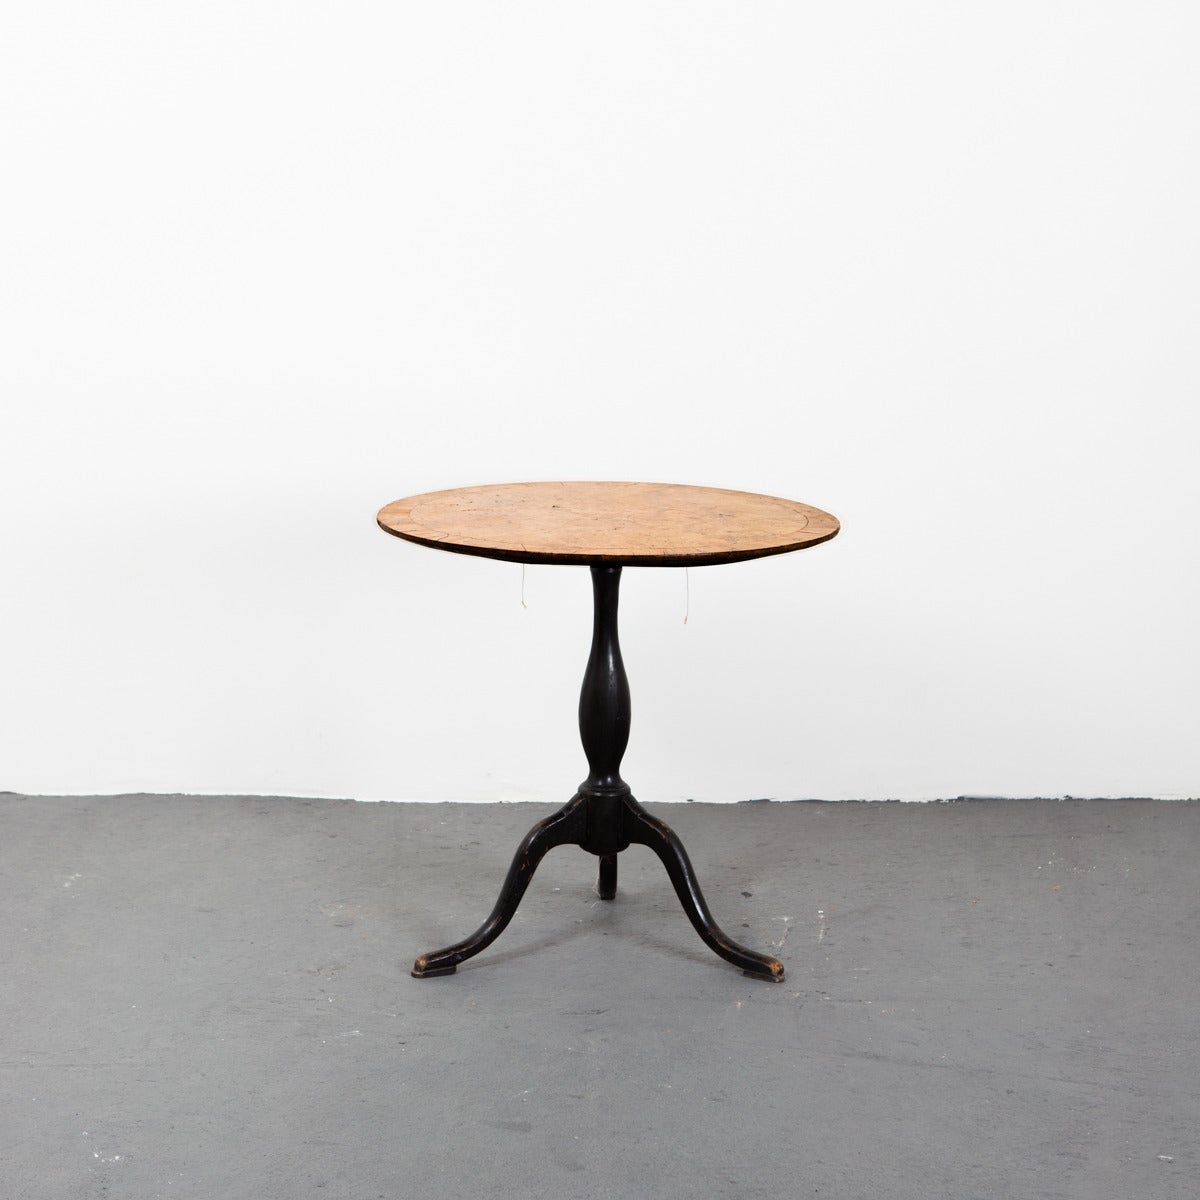 A round tilt top table made in Sweden during the Karl Johan period. The top made in alder root standing on a blackened trip pod base. All original alder root veneer. Base might have been repainted but with a beautiful patina. 

History of Swedish